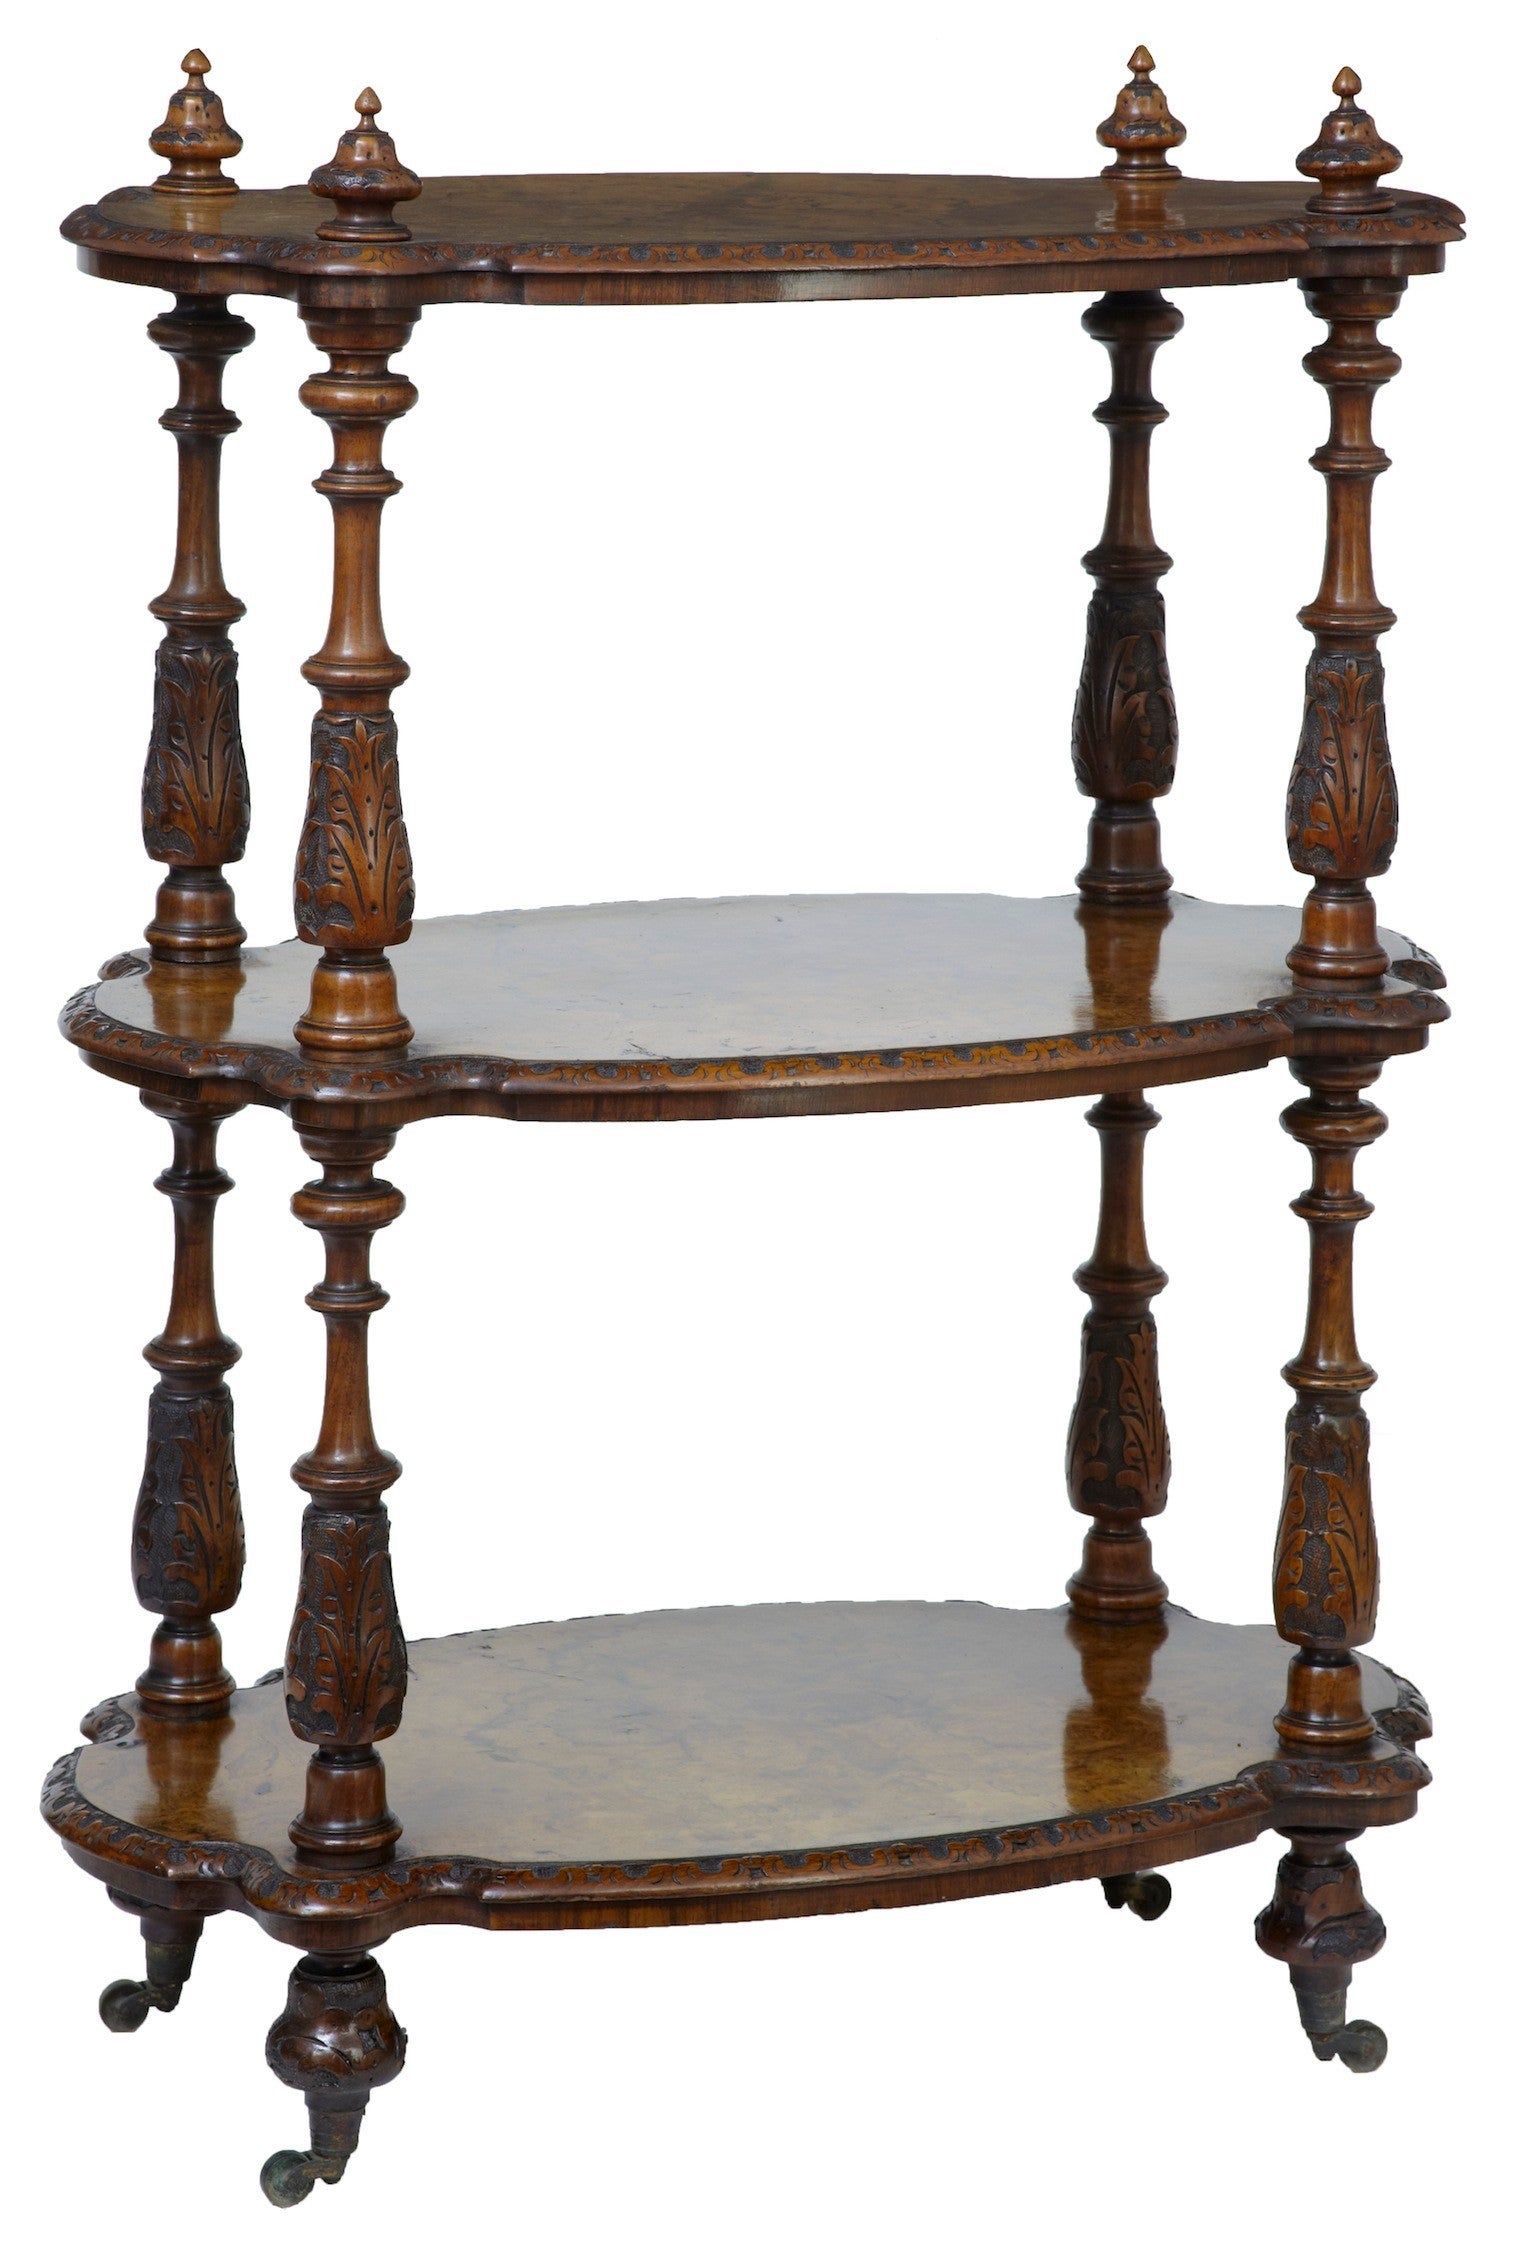 19th Century High Victorian Carved Walnut Whatnot